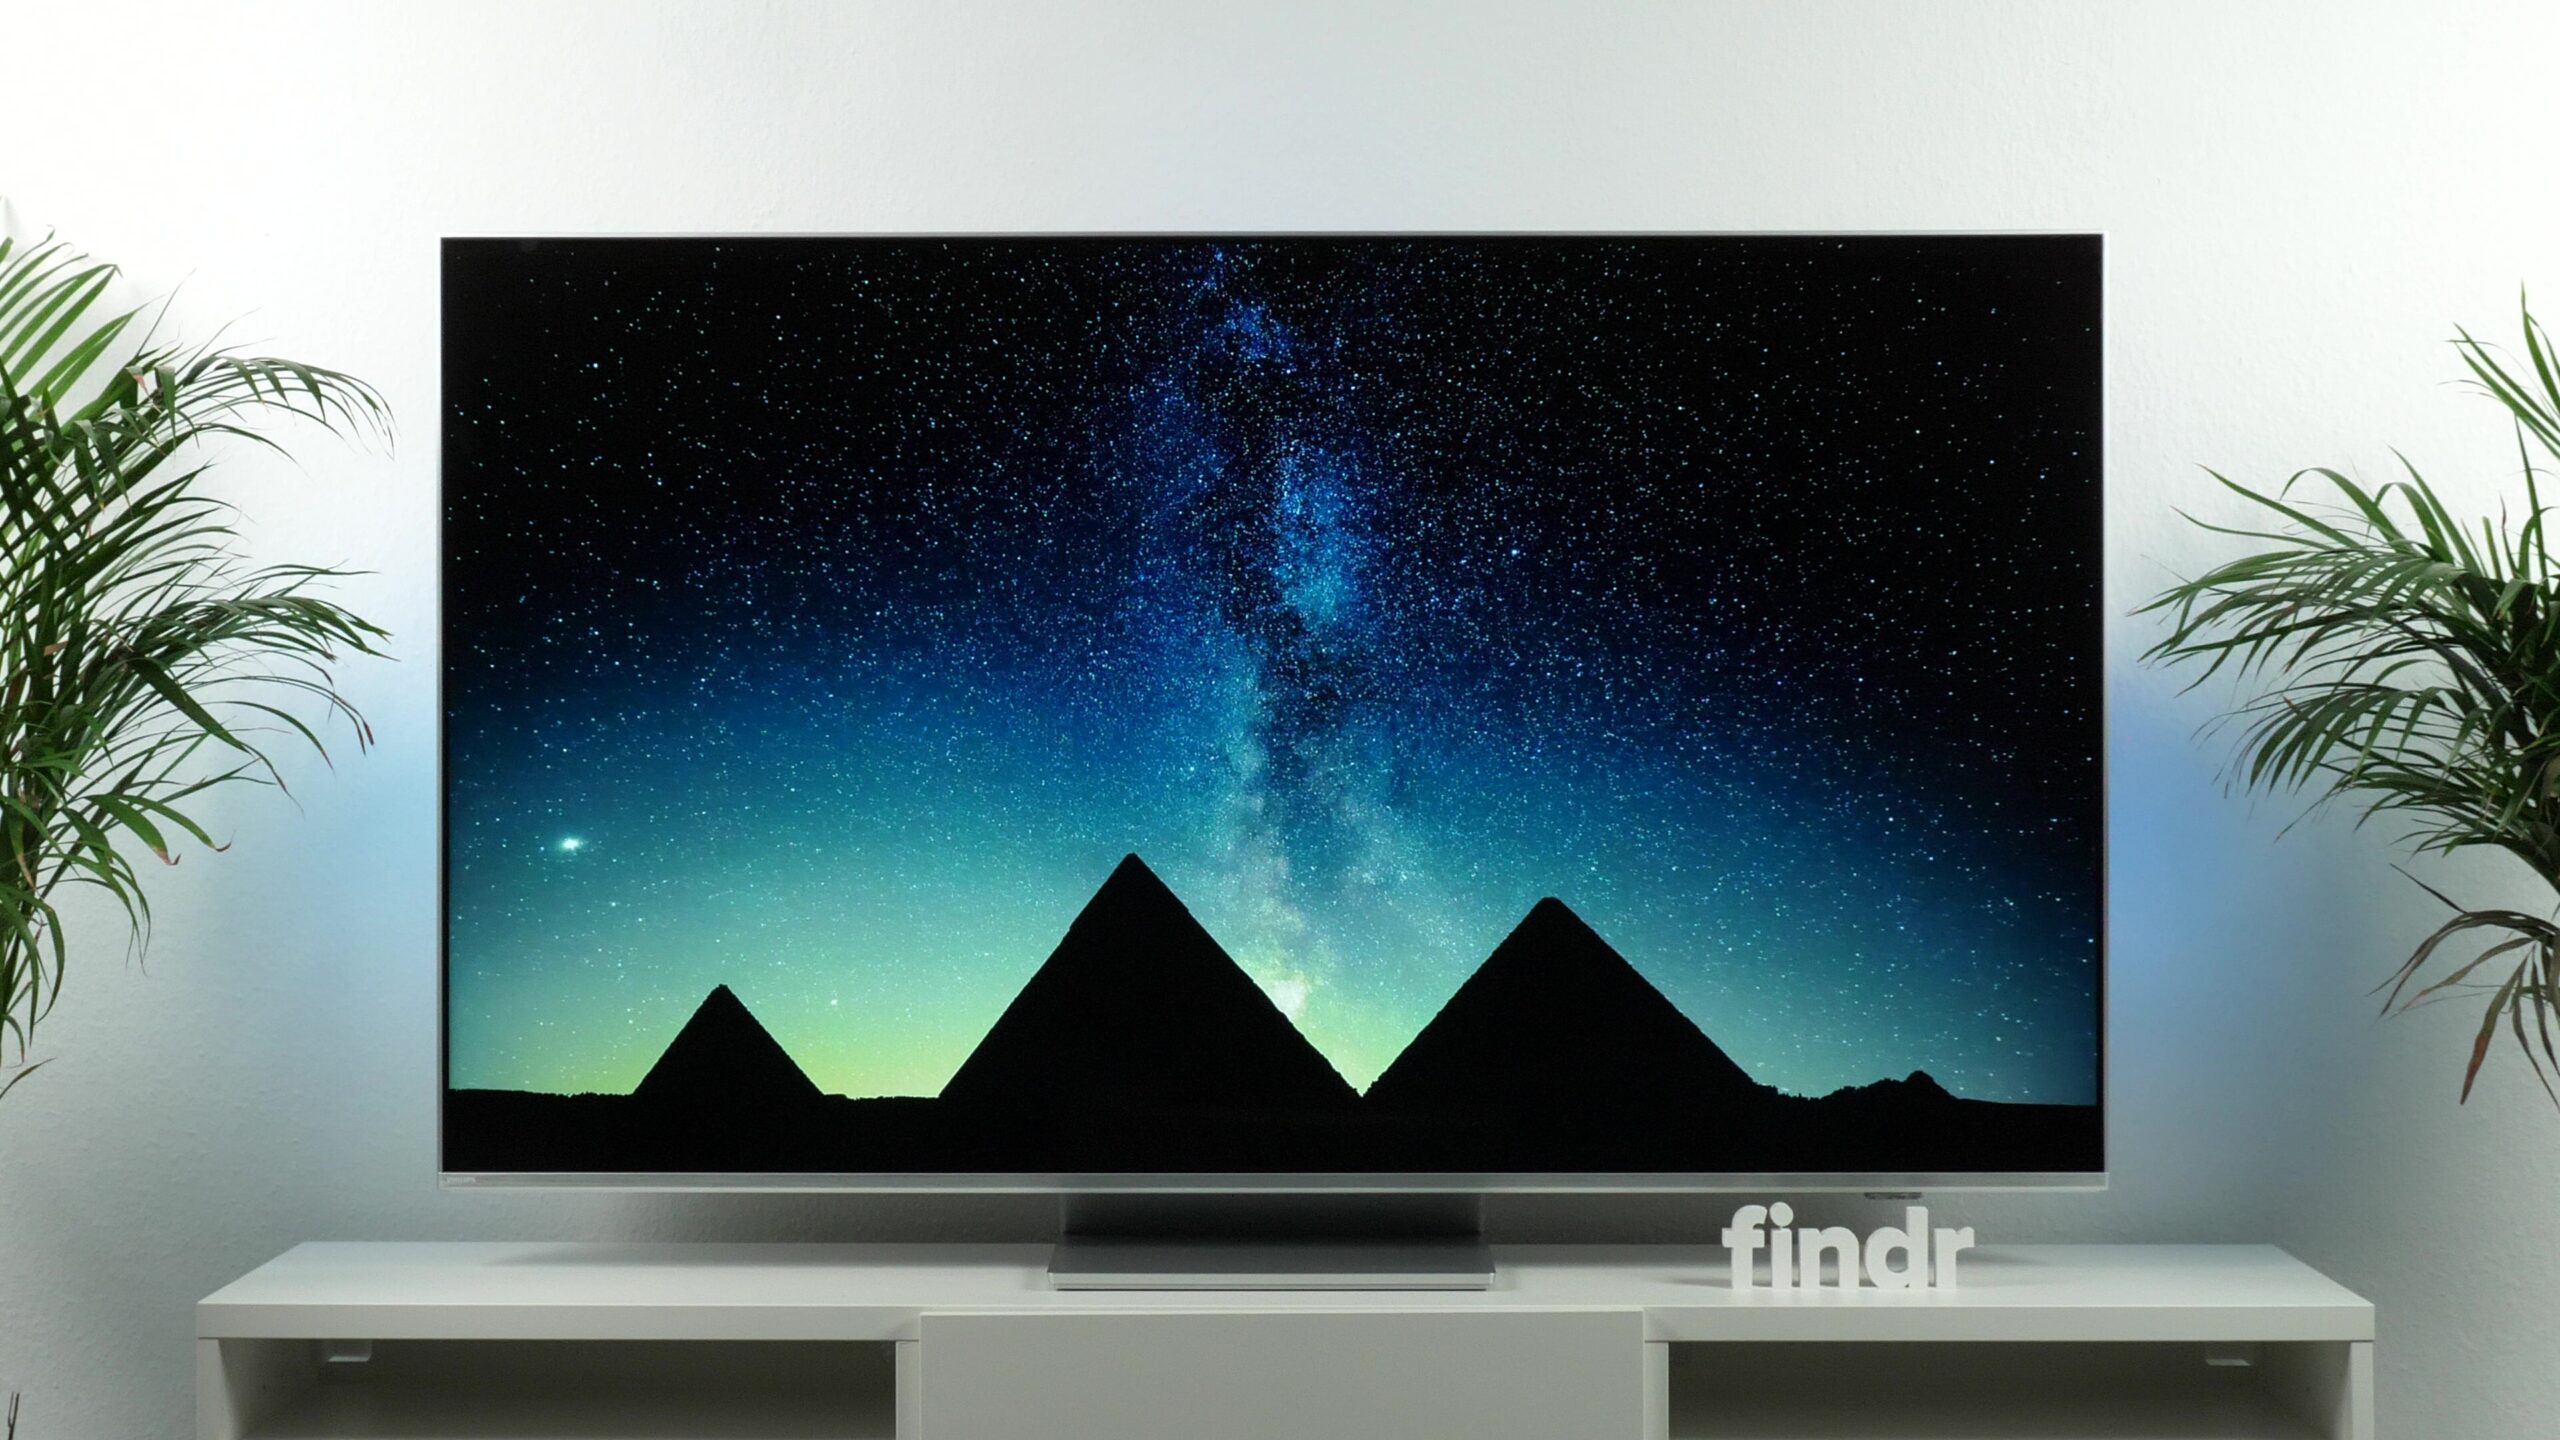 Philips PUS8807 TV Review ⇒ rating • tvfindr